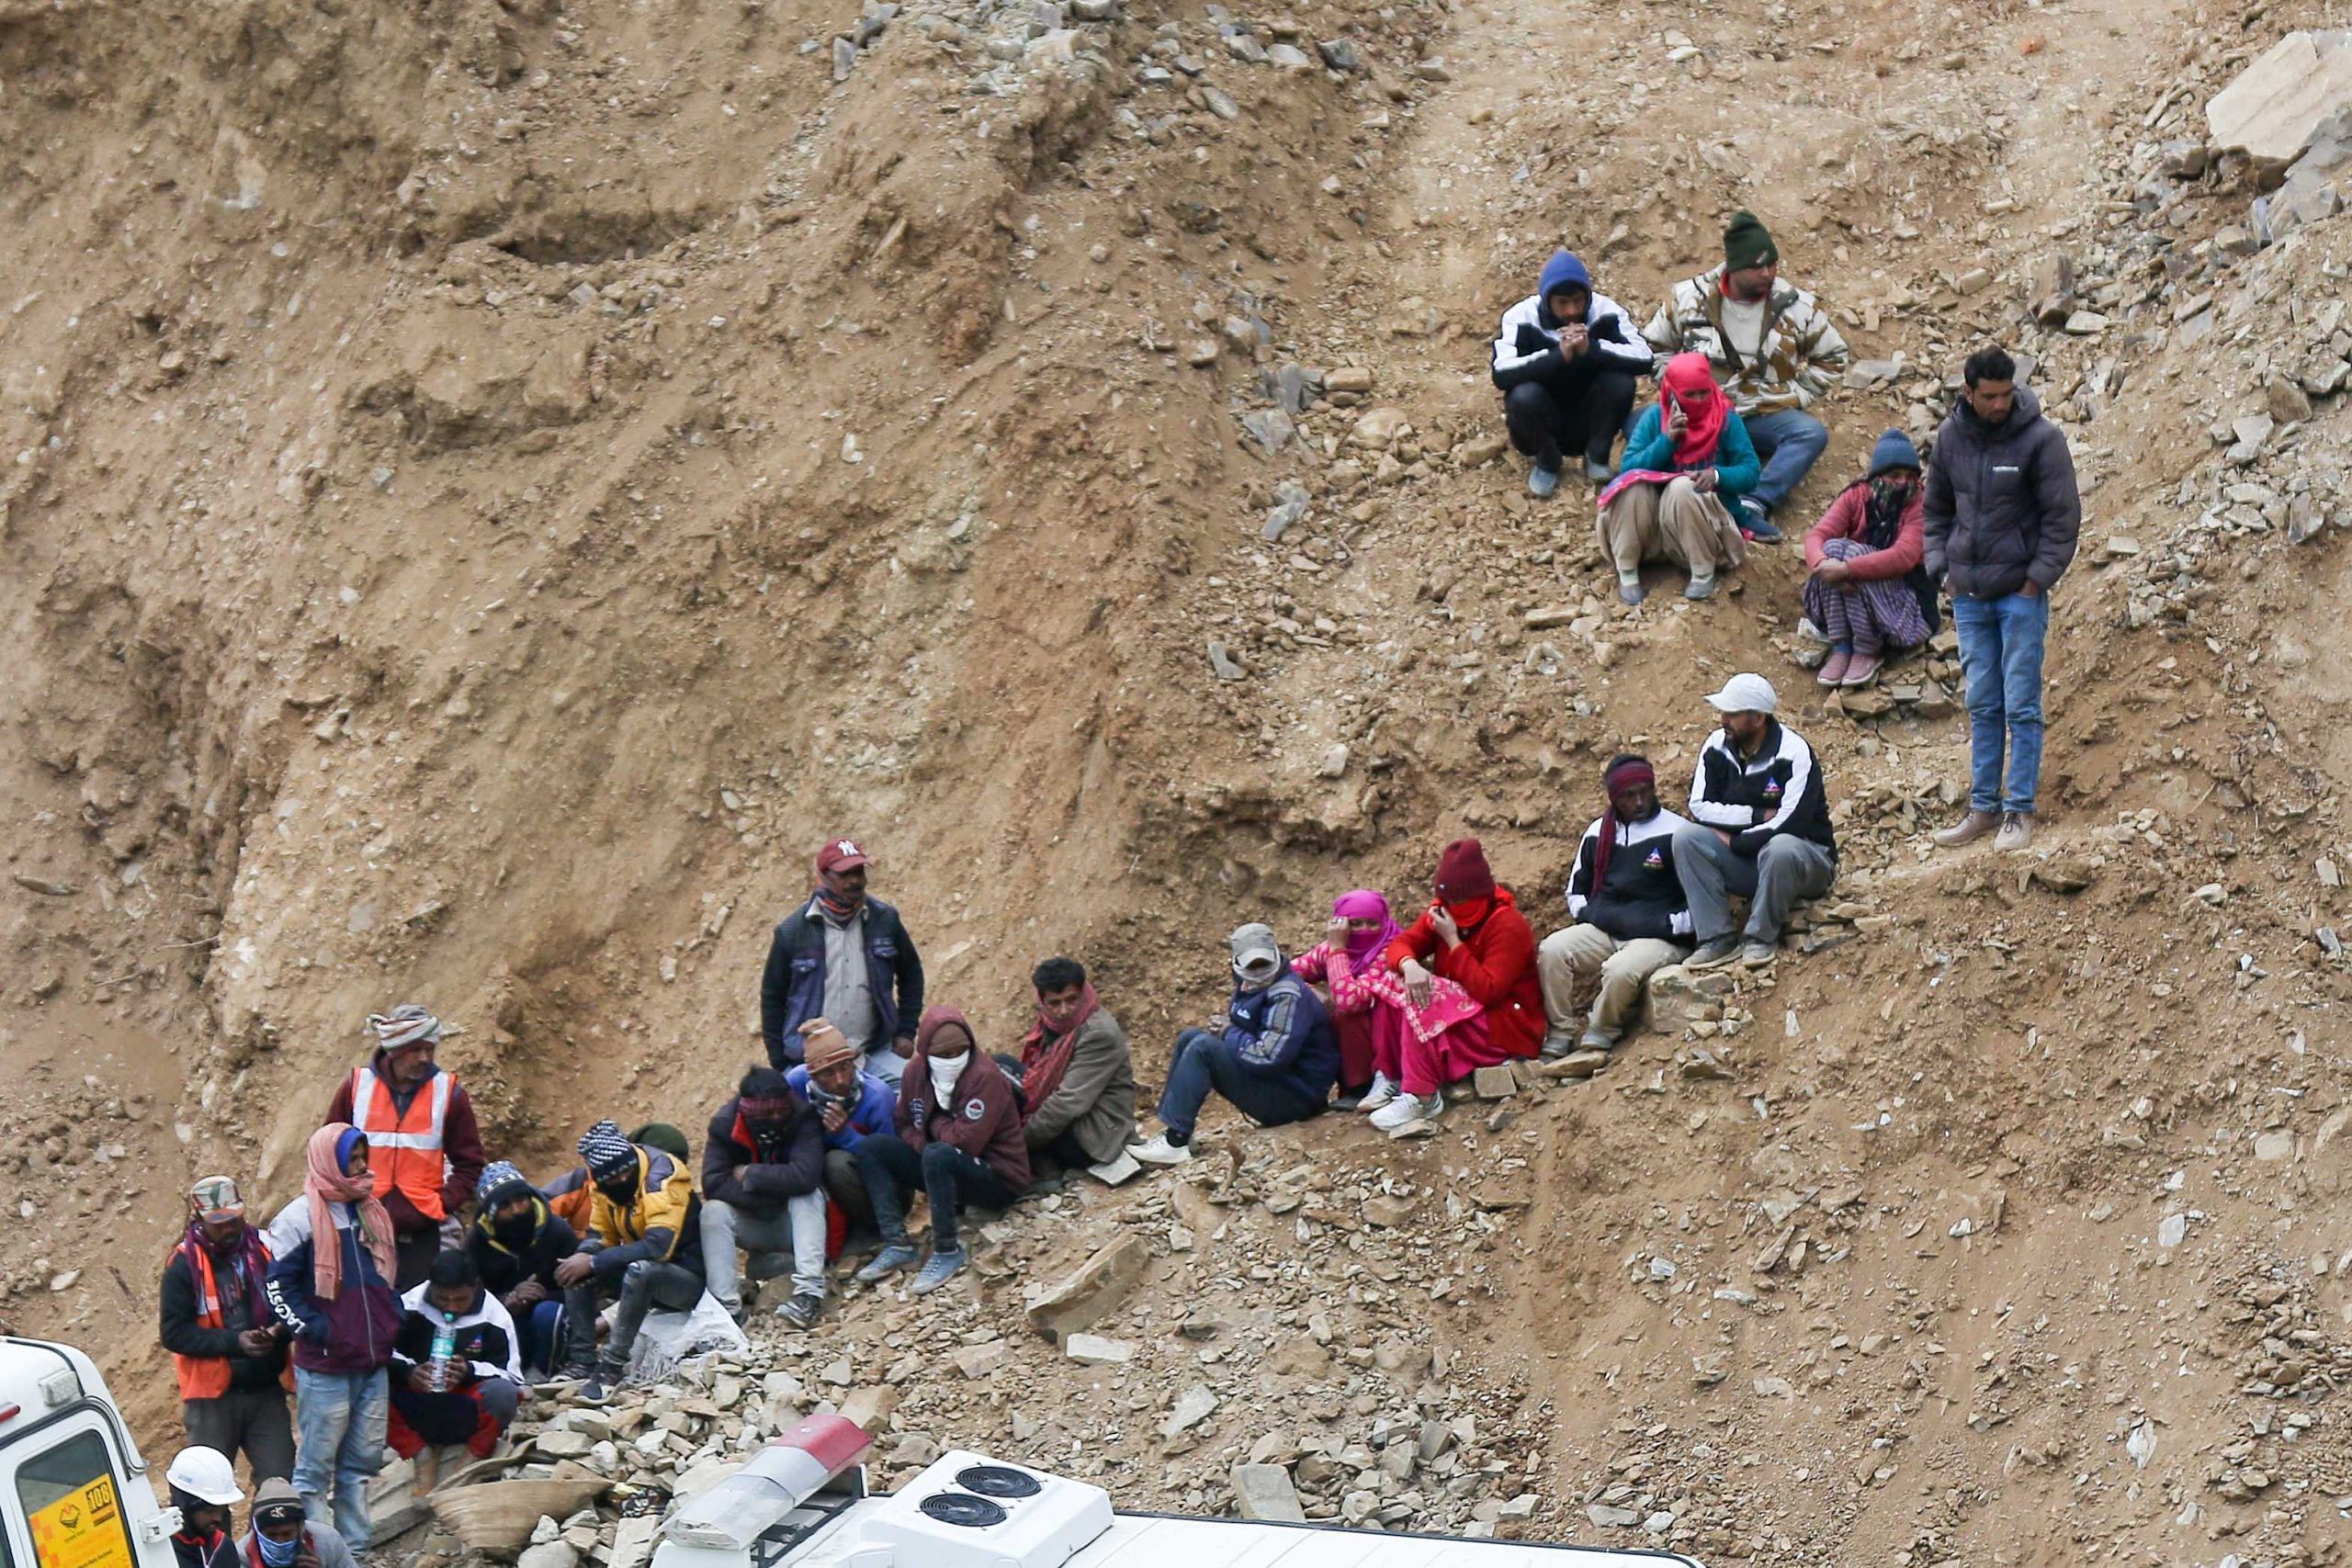 workers gather to look at the efforts by the operatives to rescue the 41 men trapped inside the collapsed under construction Silkyara tunnel in the Uttarkashi district of India's Uttarakhand state | Suraj Singh Bisht | ThePrint